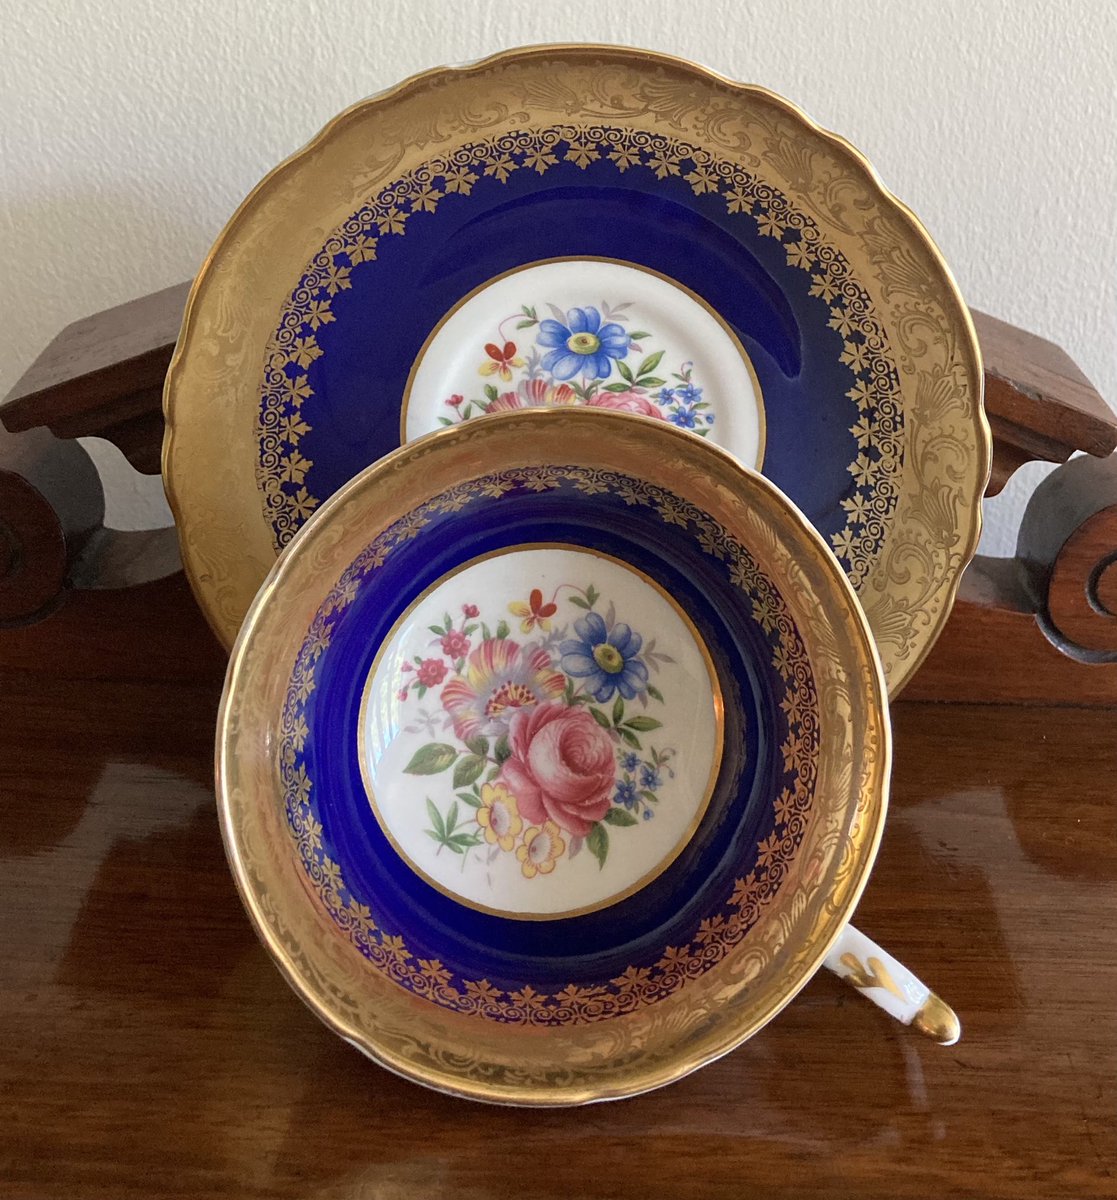 Exquisite Paragon gold and cobalt cup and saucer, from Brocante Antiques, 120 Oatlands Drive, Weybridge.